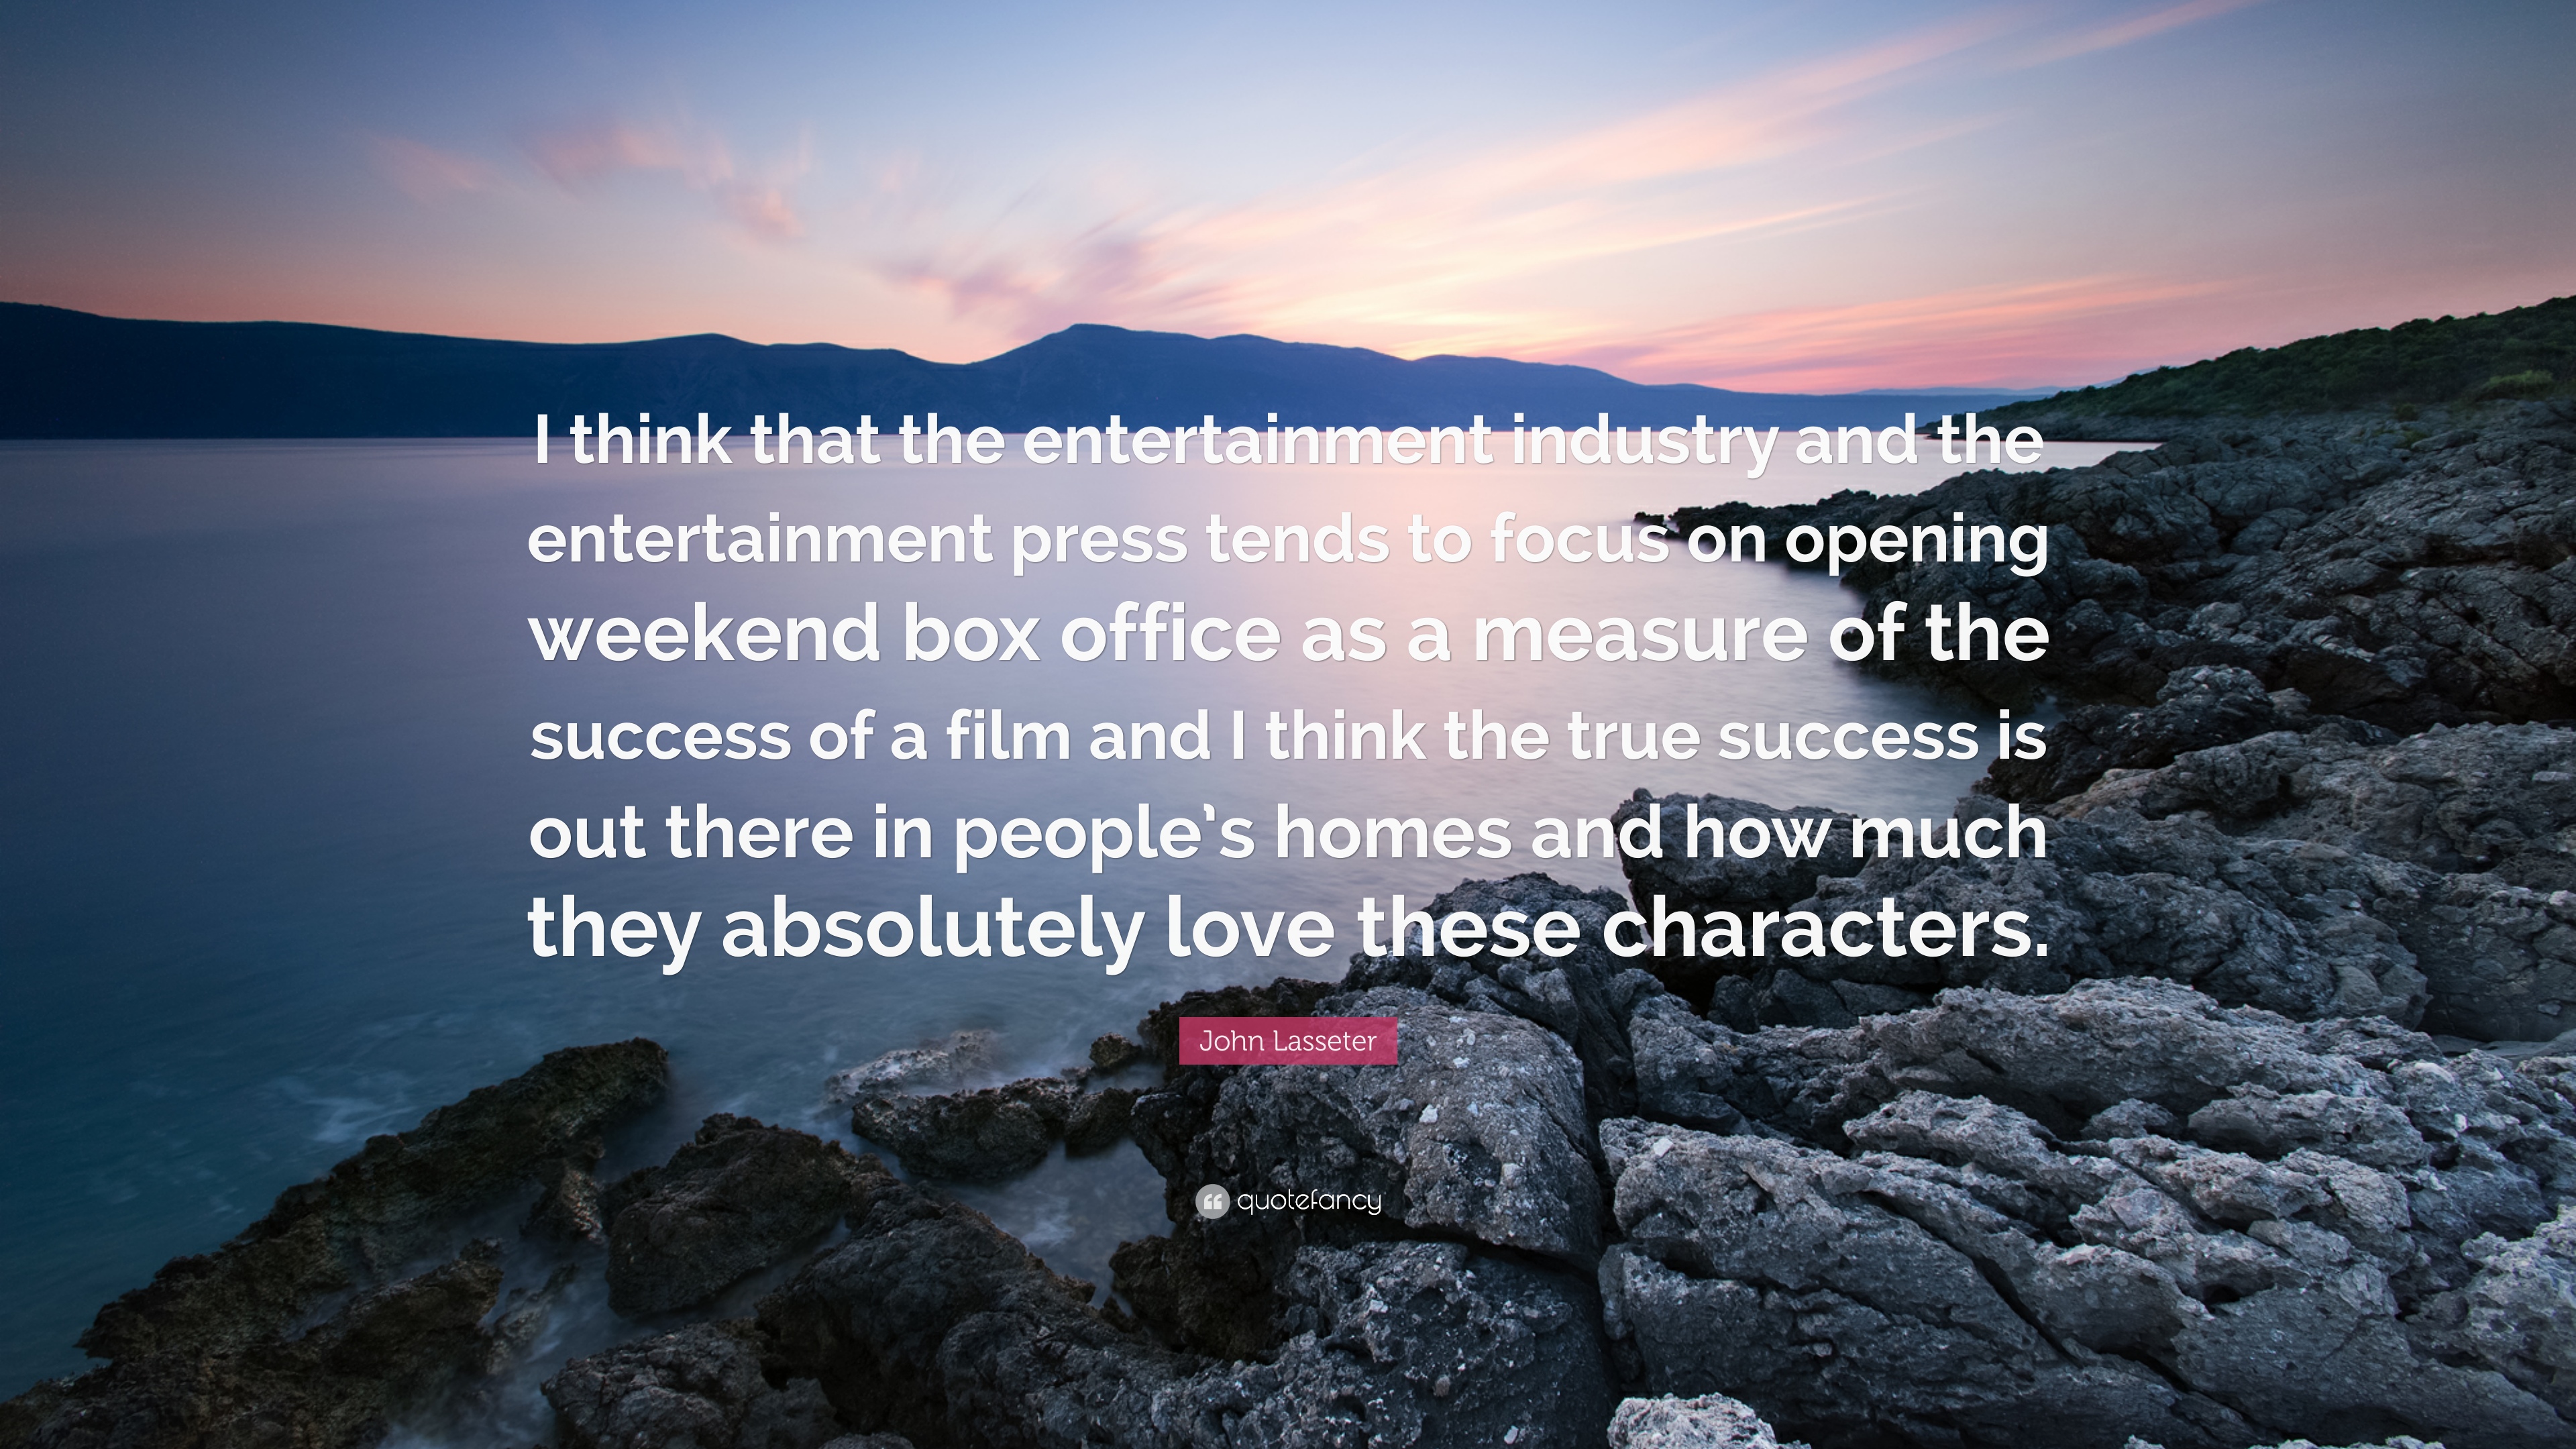 John Lasseter Quote: “I think that the entertainment industry